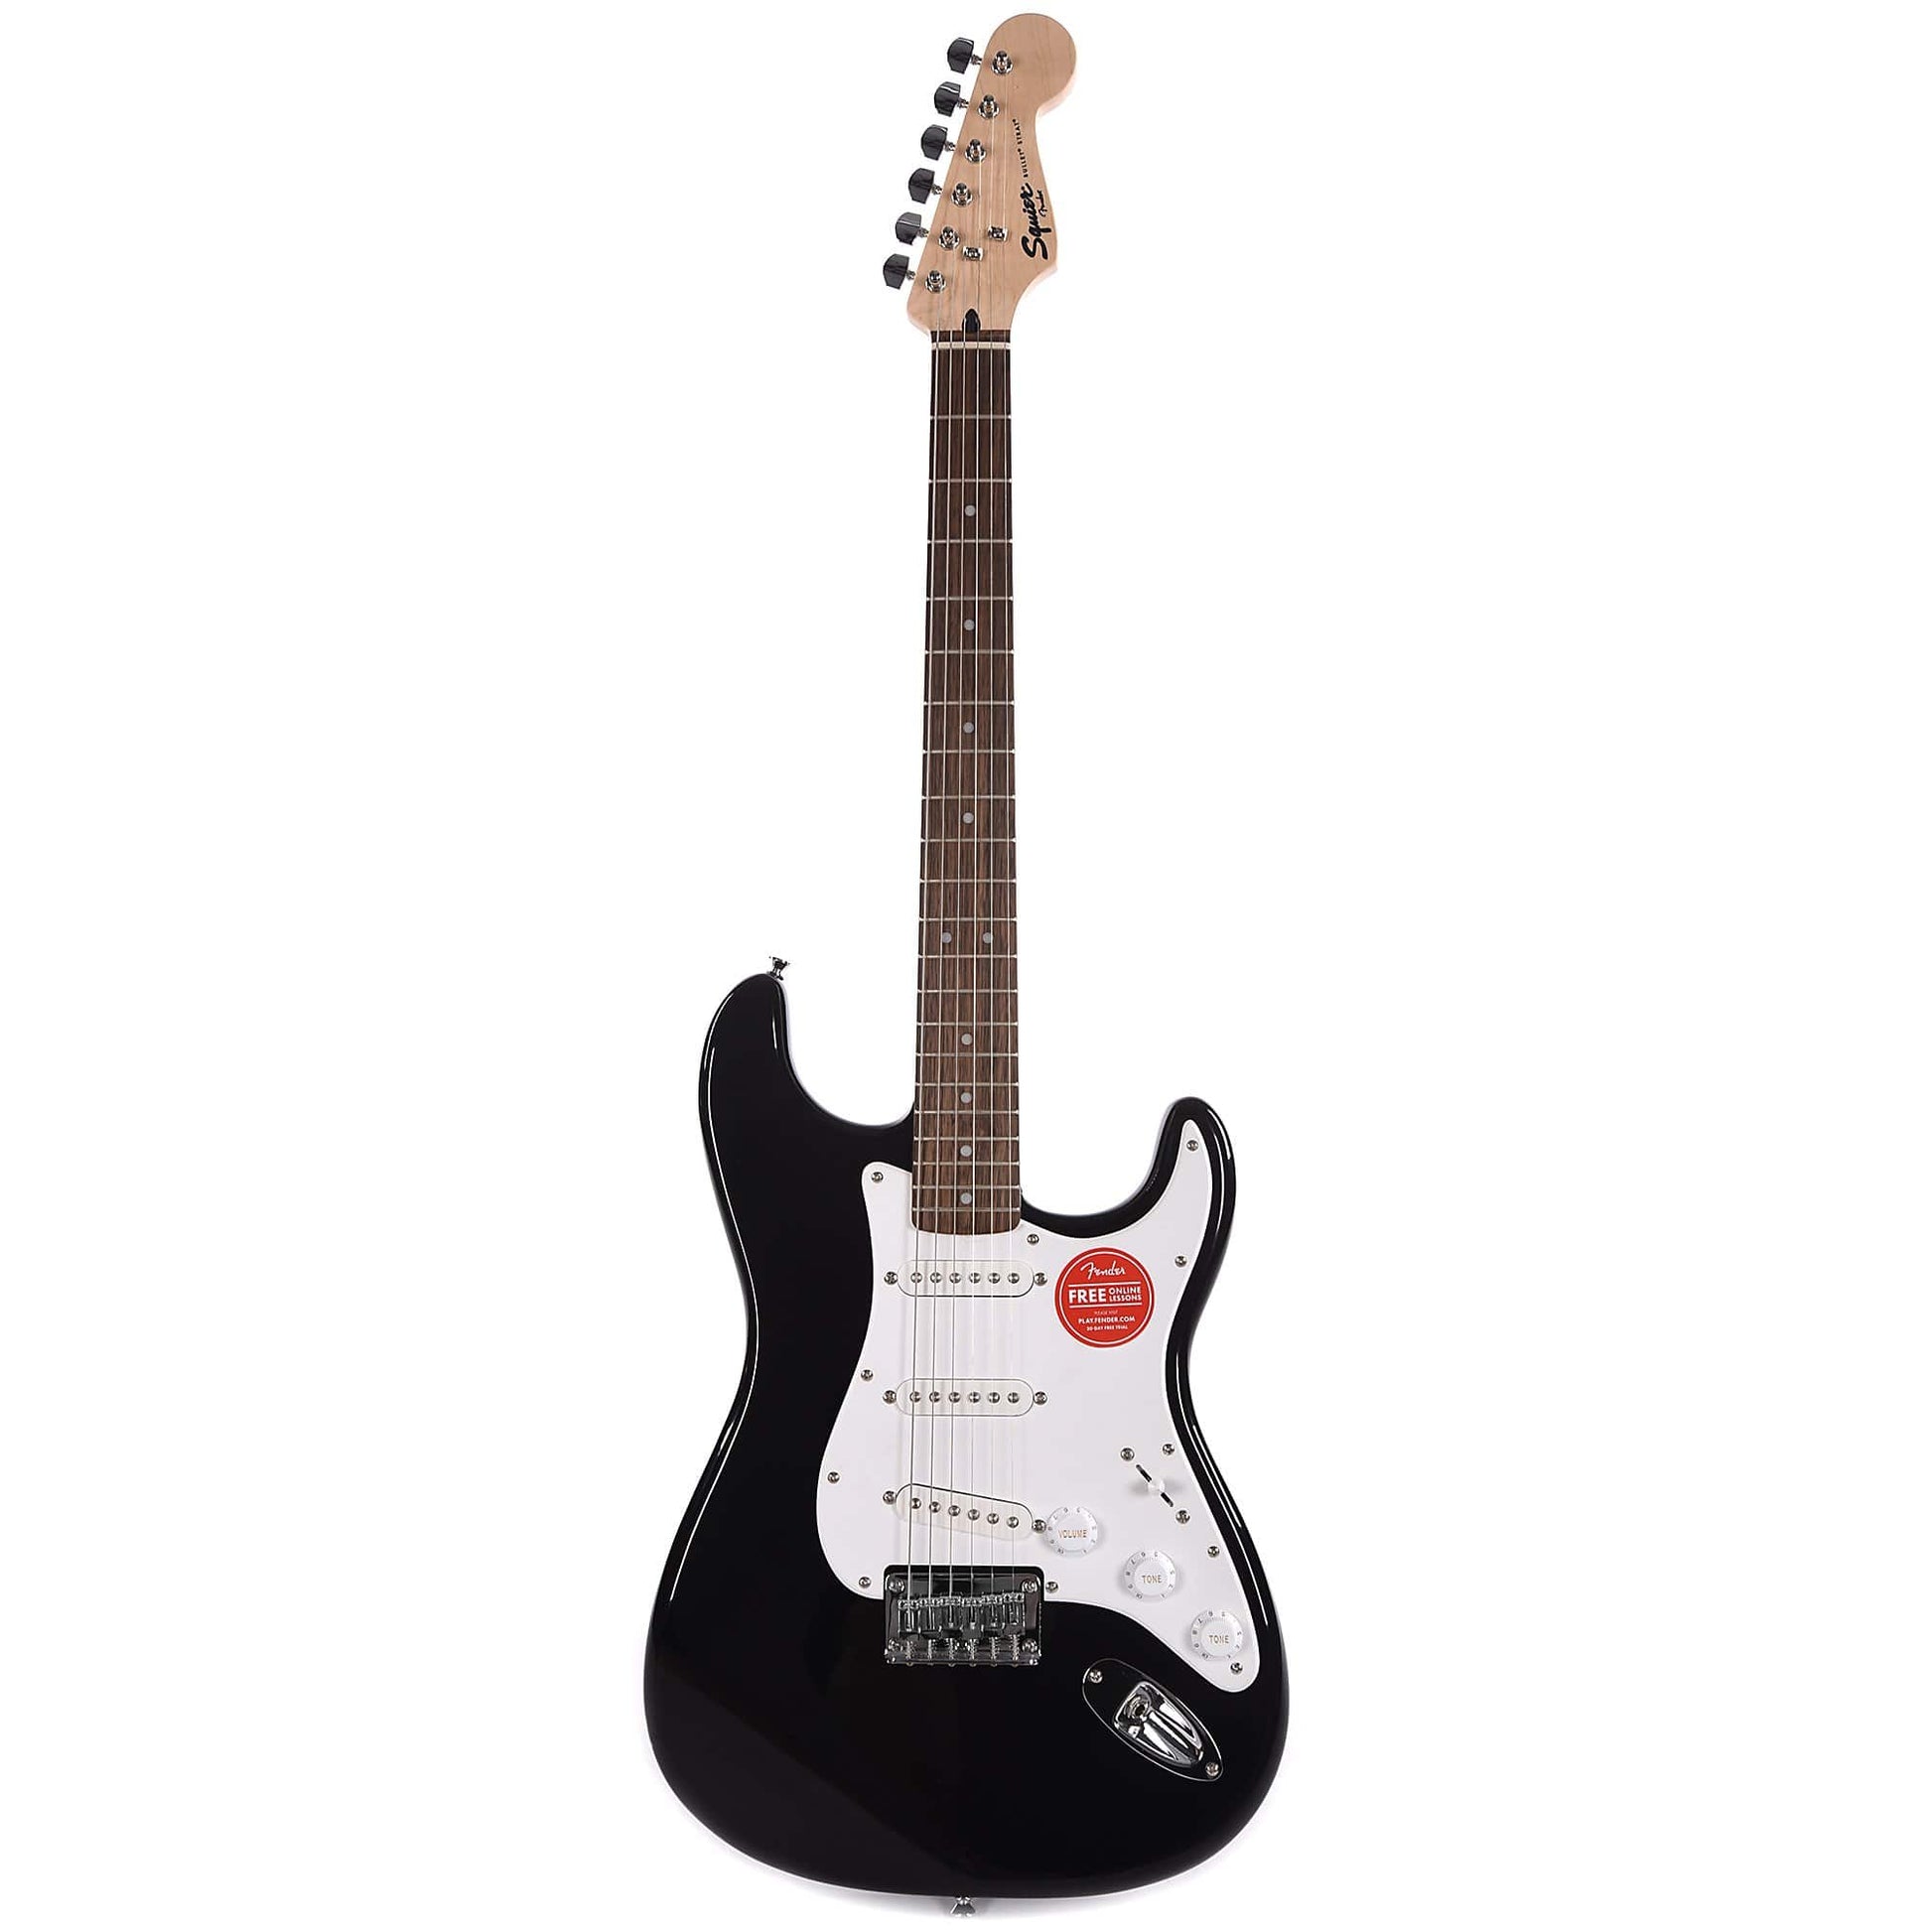 Squier Bullet Stratocaster Hard Tail Black Electric Guitars / Travel / Mini